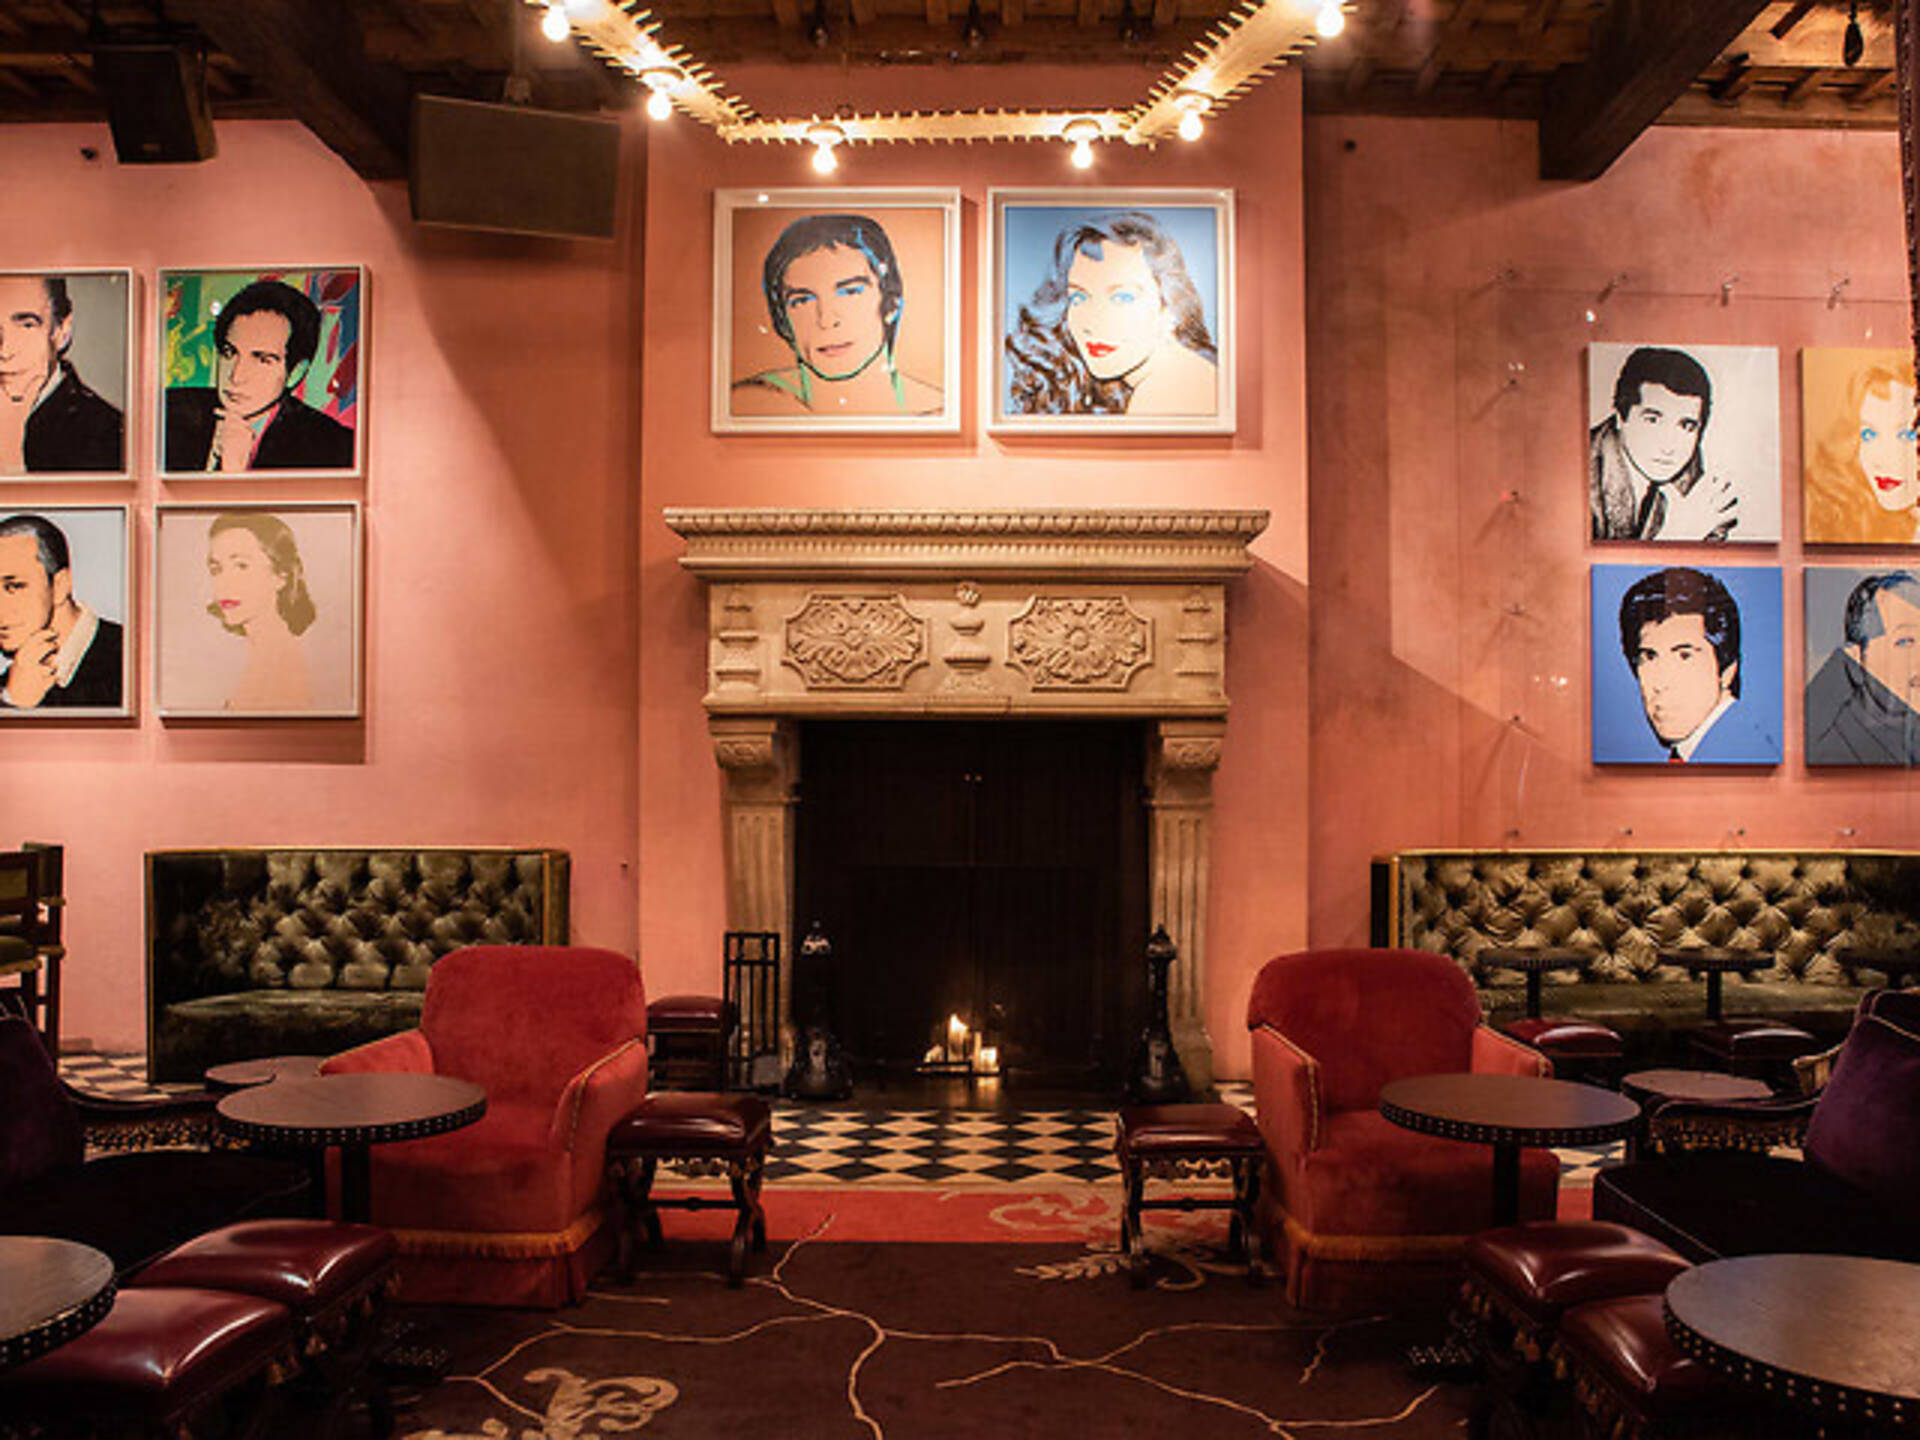 6 Best Hotel Bars NYC Has for Drinks at For a Classy Night Out